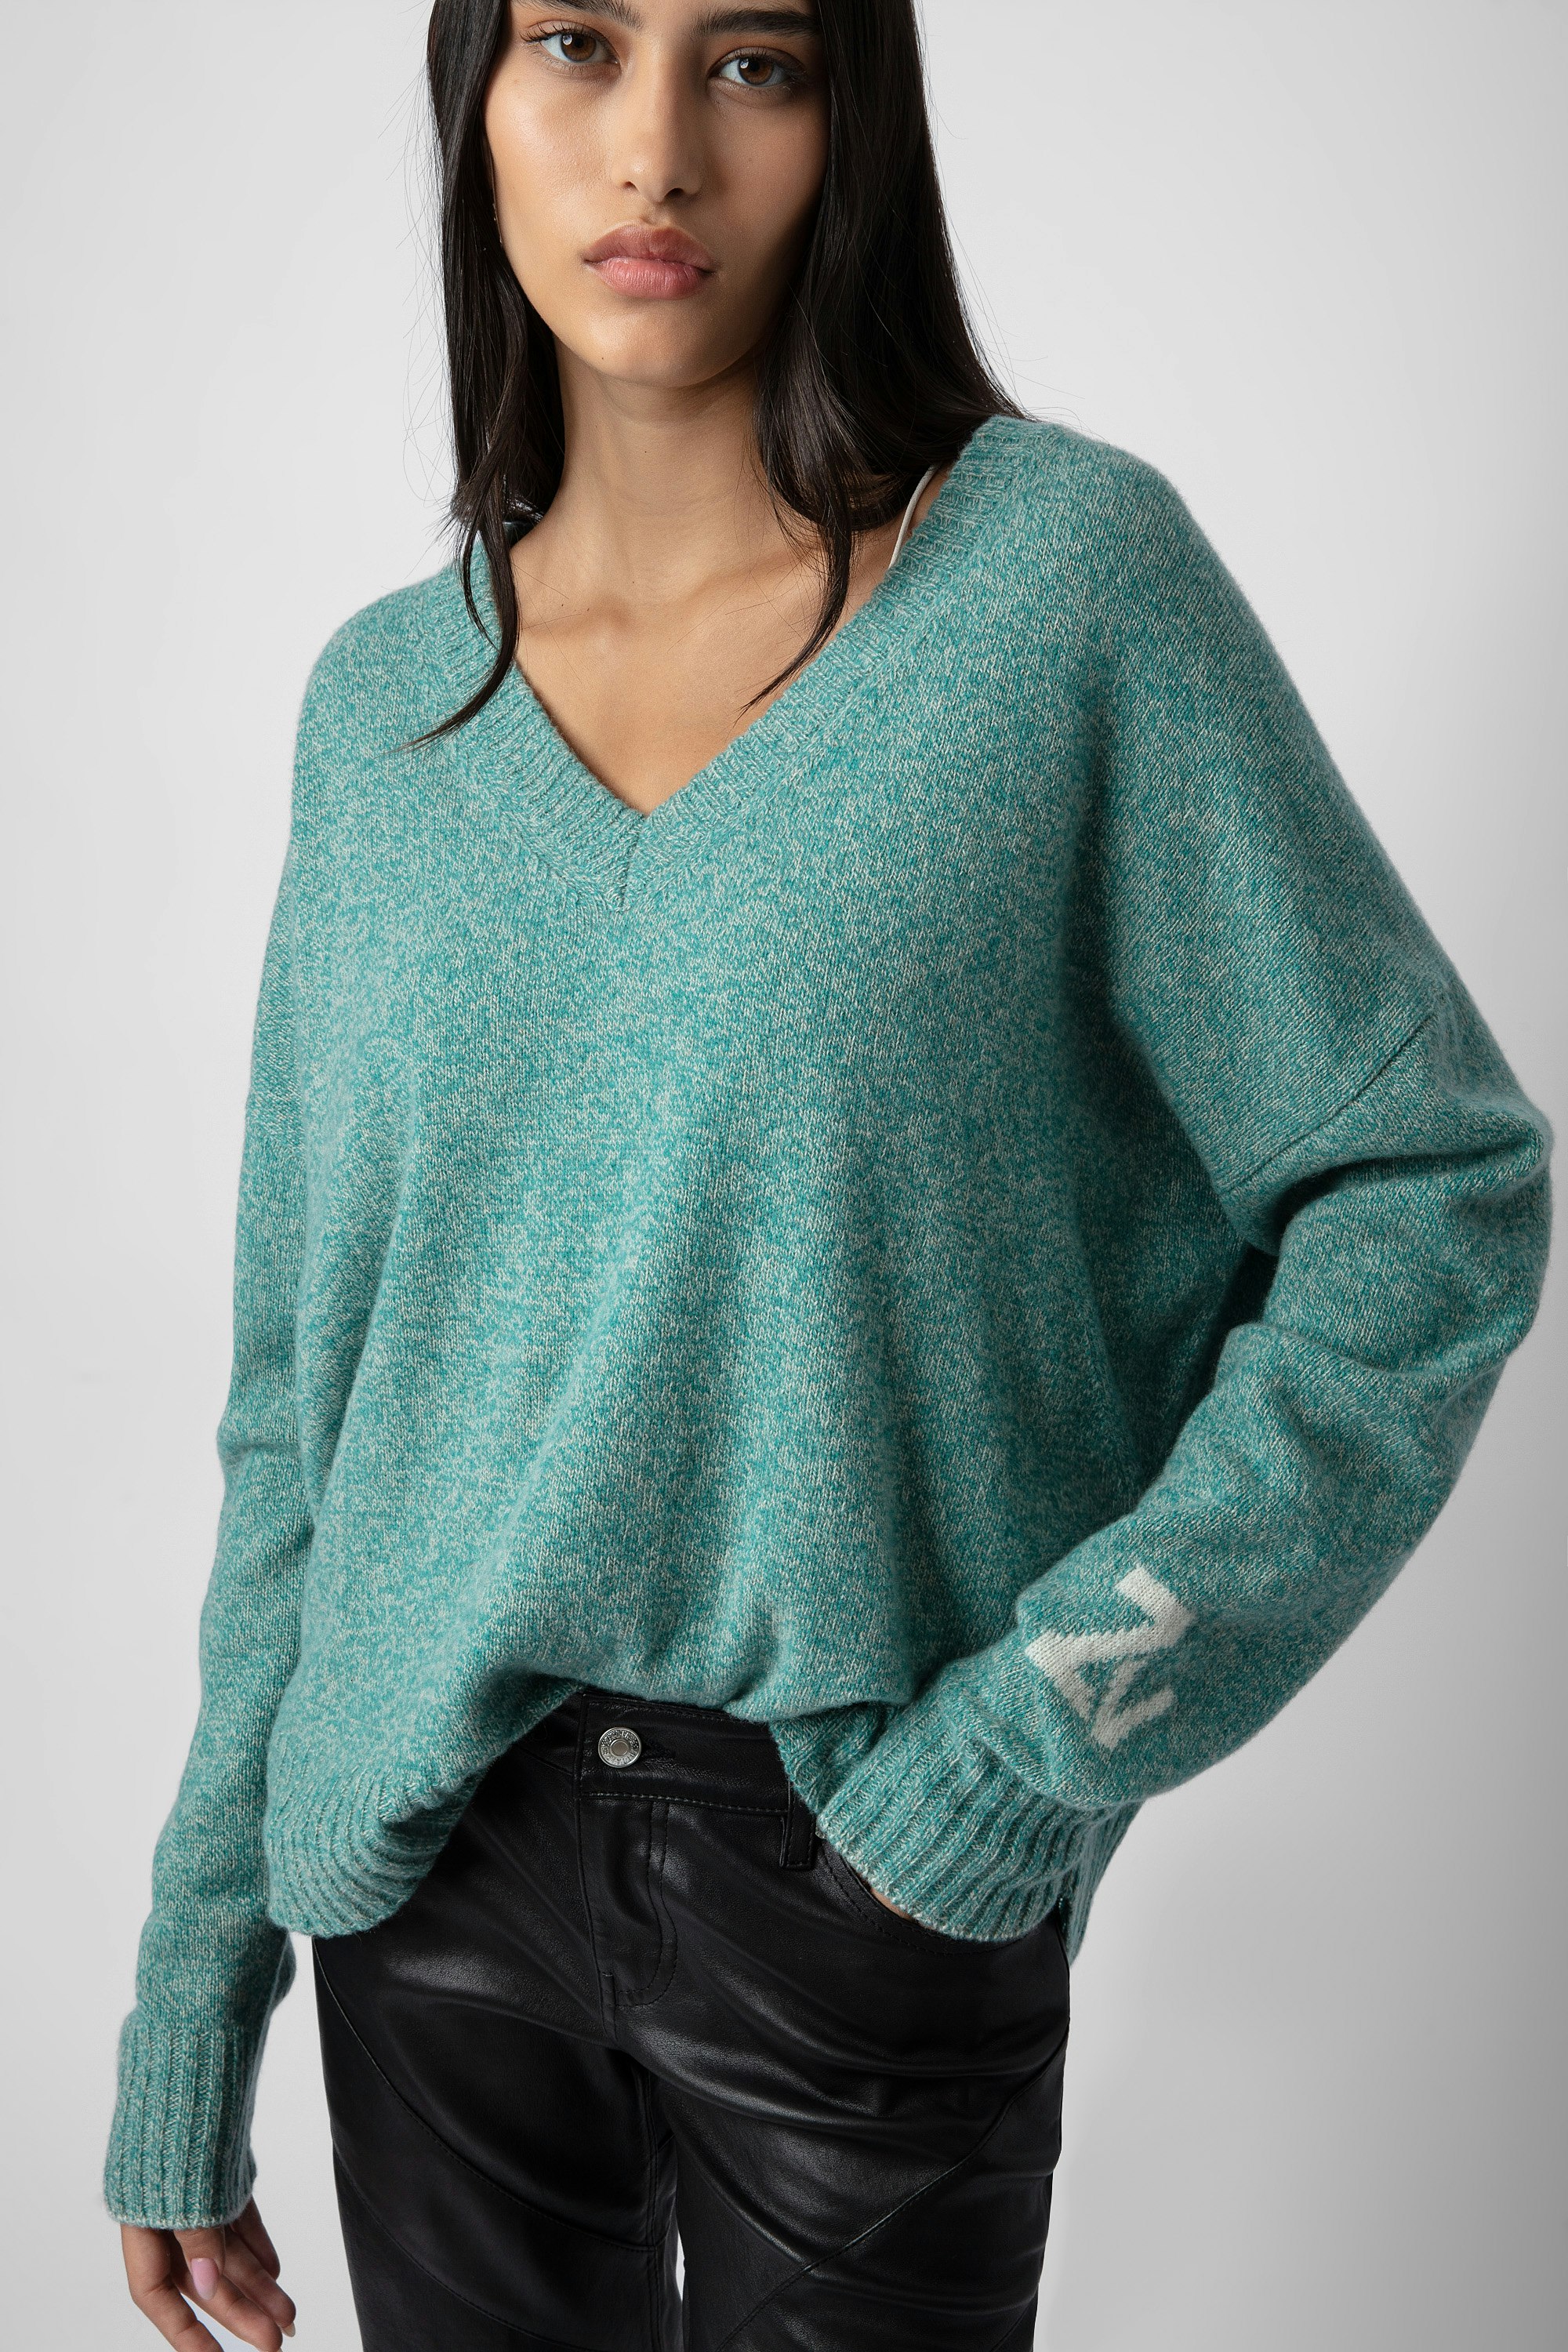 Rosy Jumper - Women’s green knit jumper with ZV signature on the left sleeve.